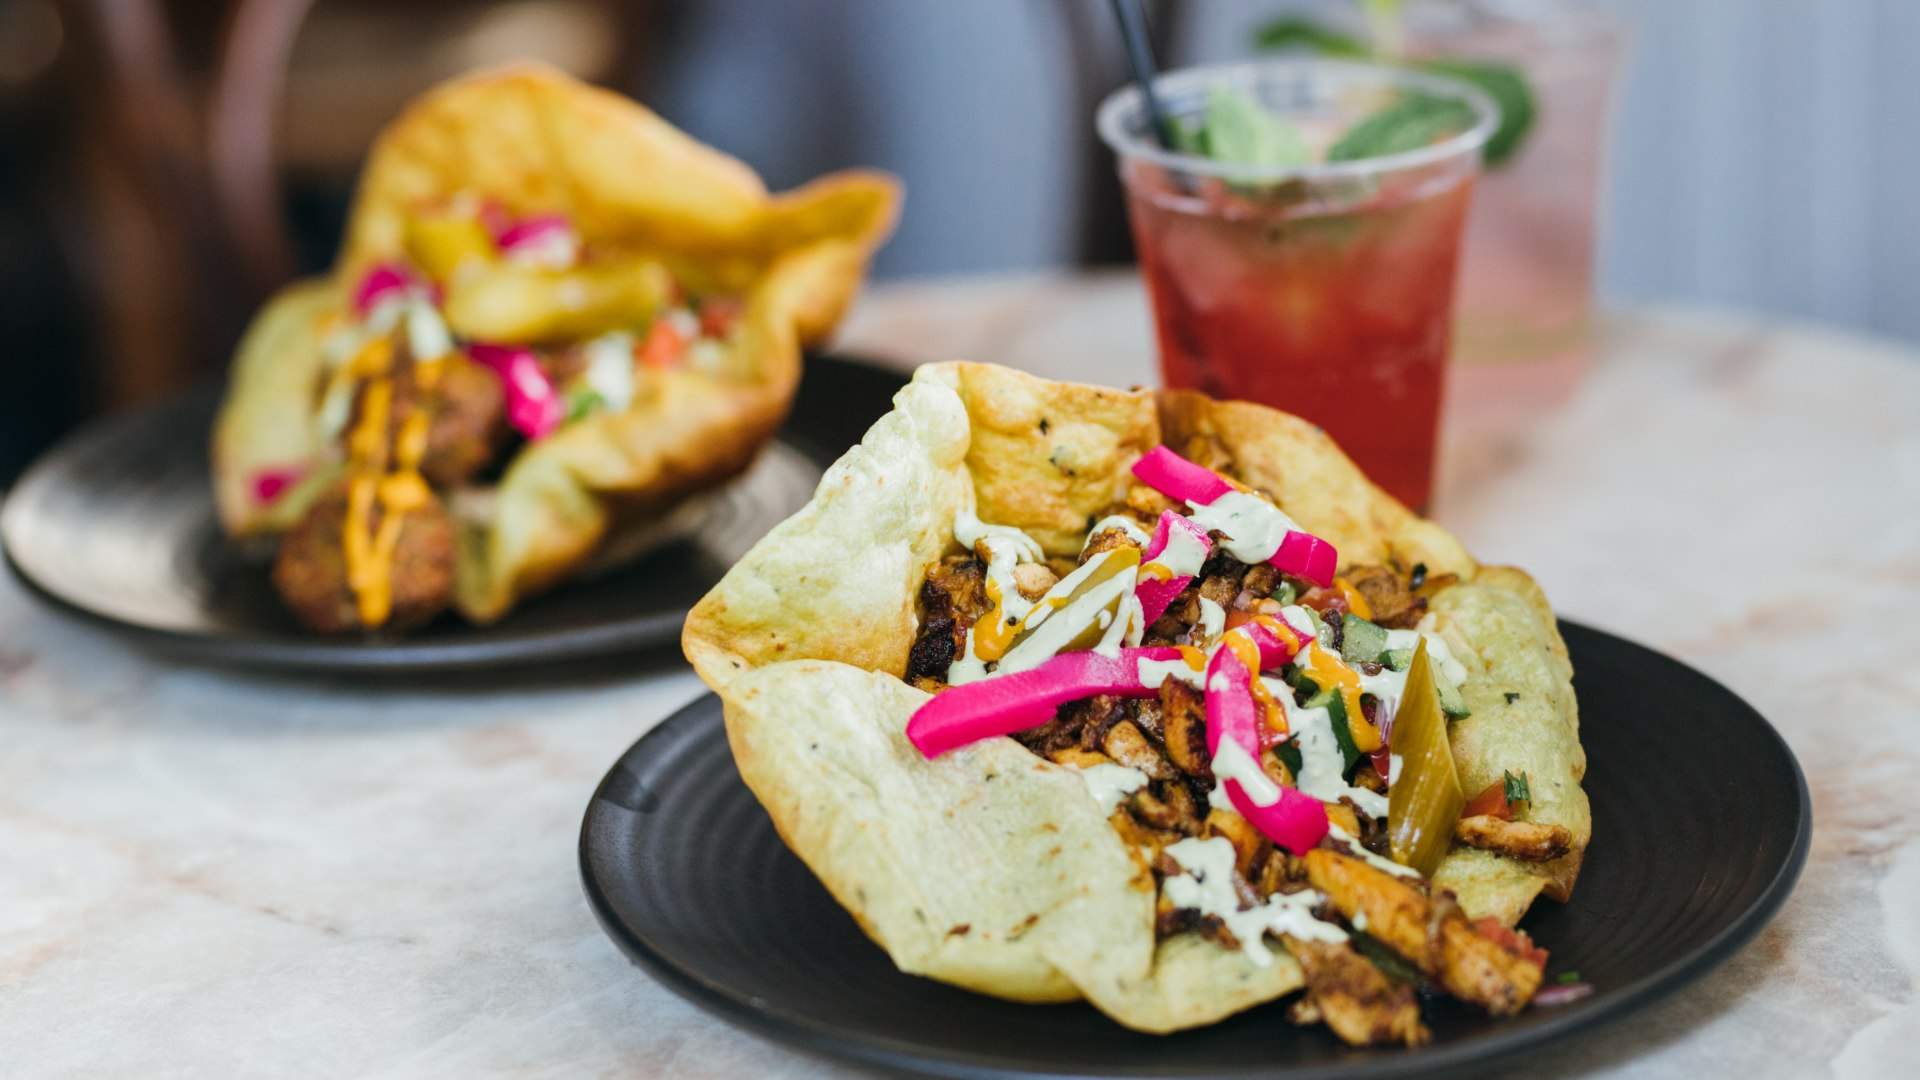 Pocket Pita Is the New Israeli Street Food Diner That's Popped Up on the Lower North Shore